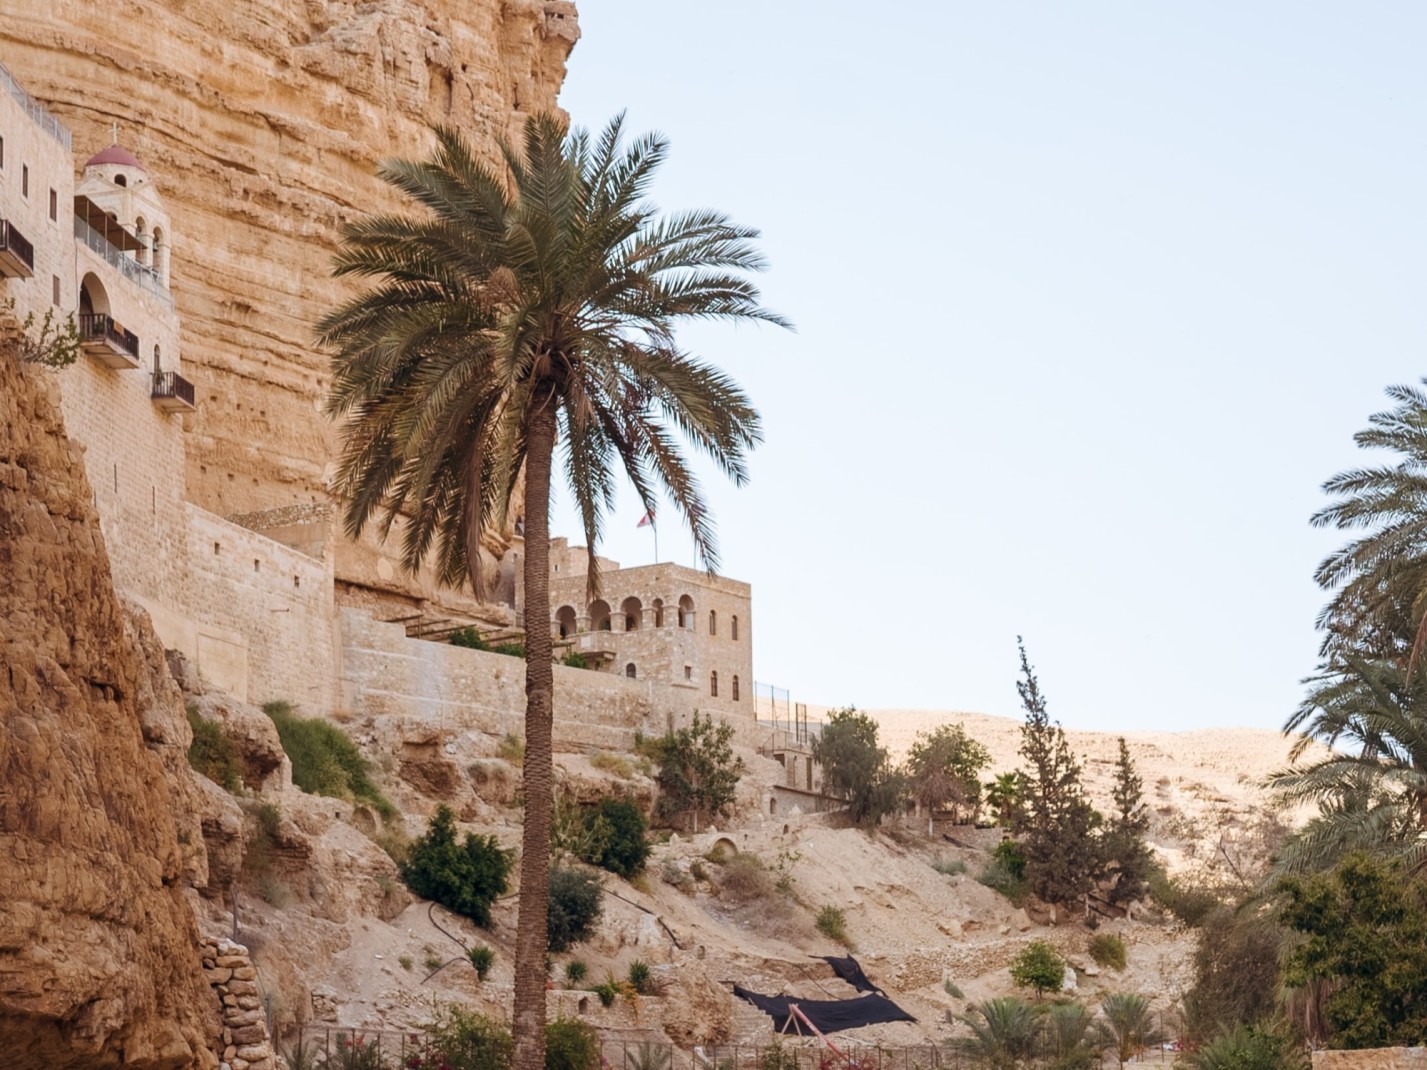 Ancient desert city, Jericho, made of limestone with palm trees on a clear day.